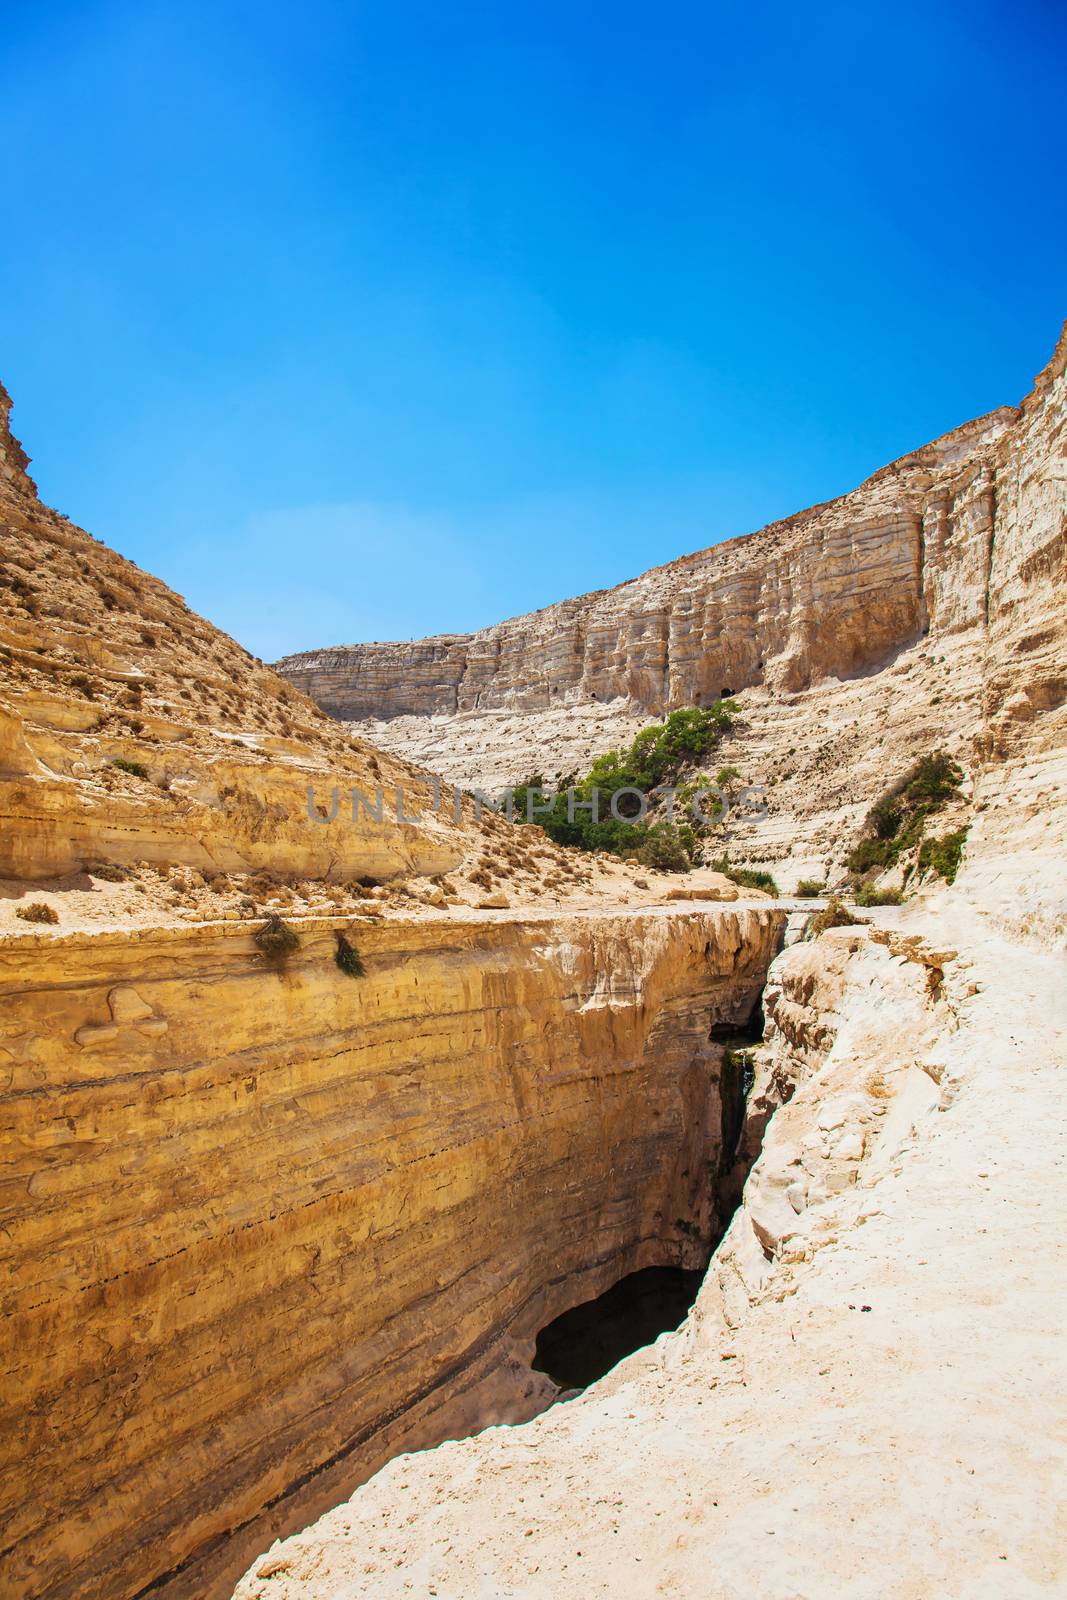 landscape of the gorge in the Negev desert